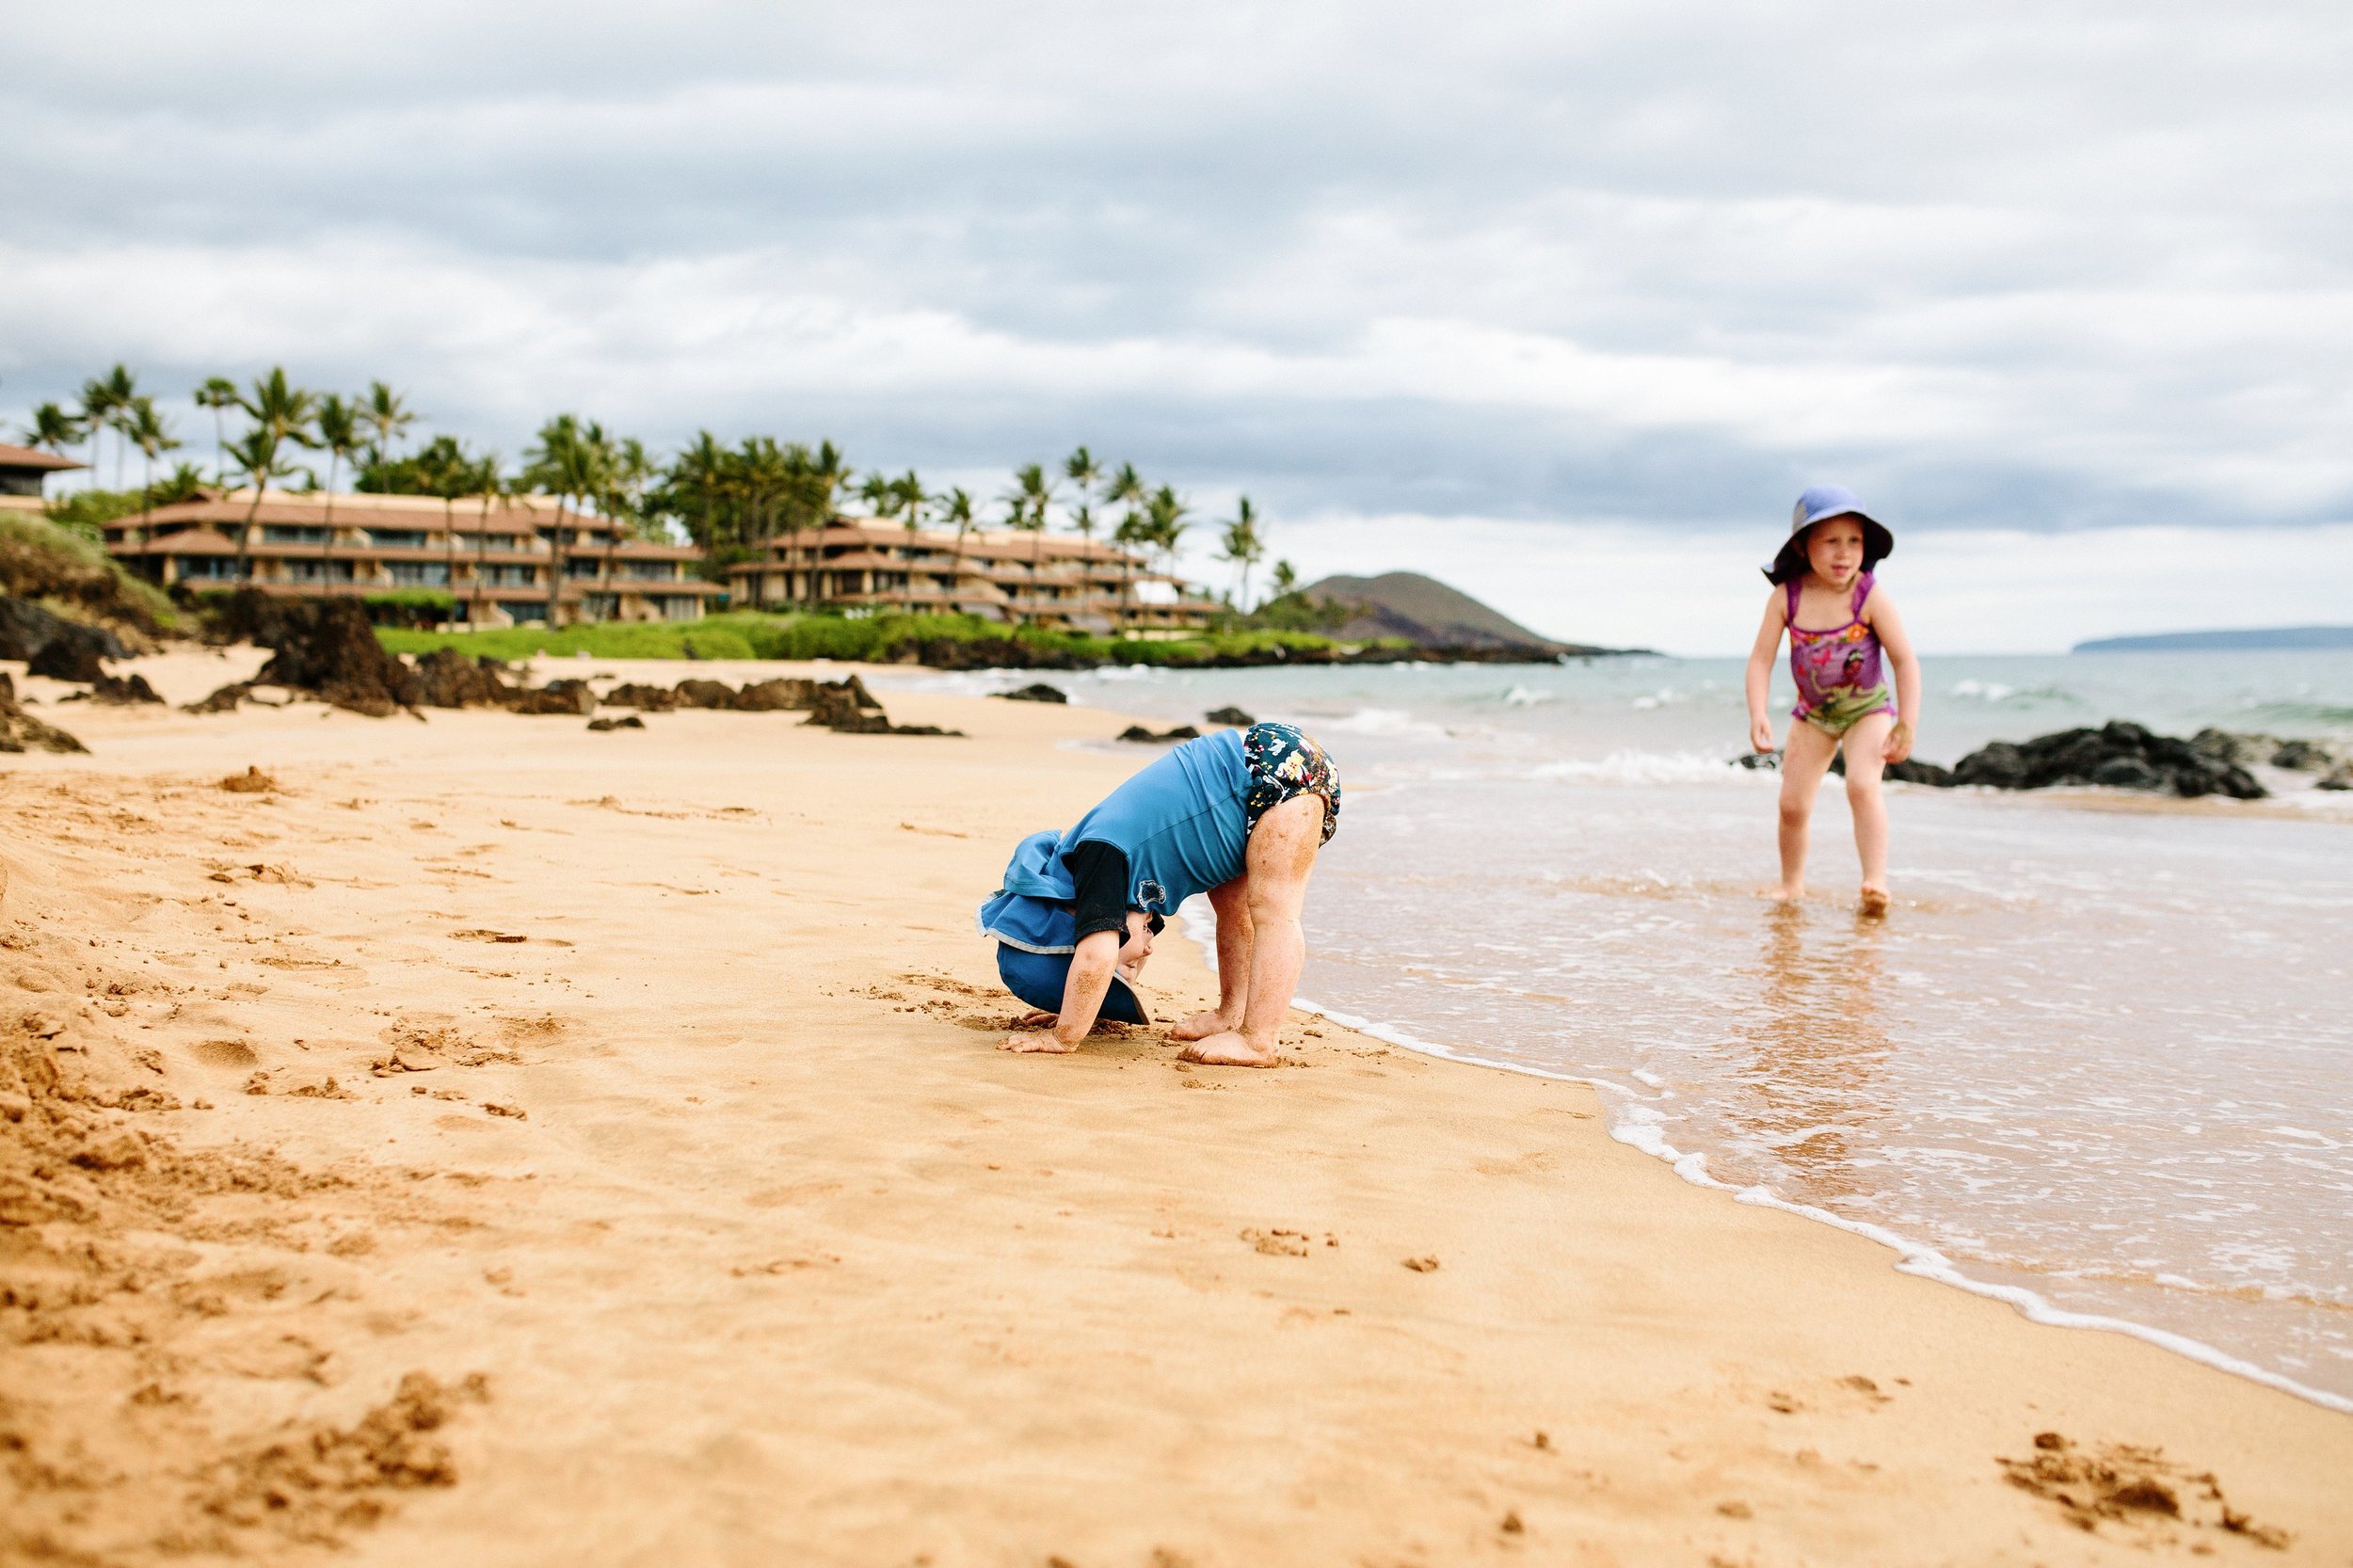 Family Beach Day Photo Session on Maui by Seattle Lifestyle Photographer Janelle Elaine Photography.jpg